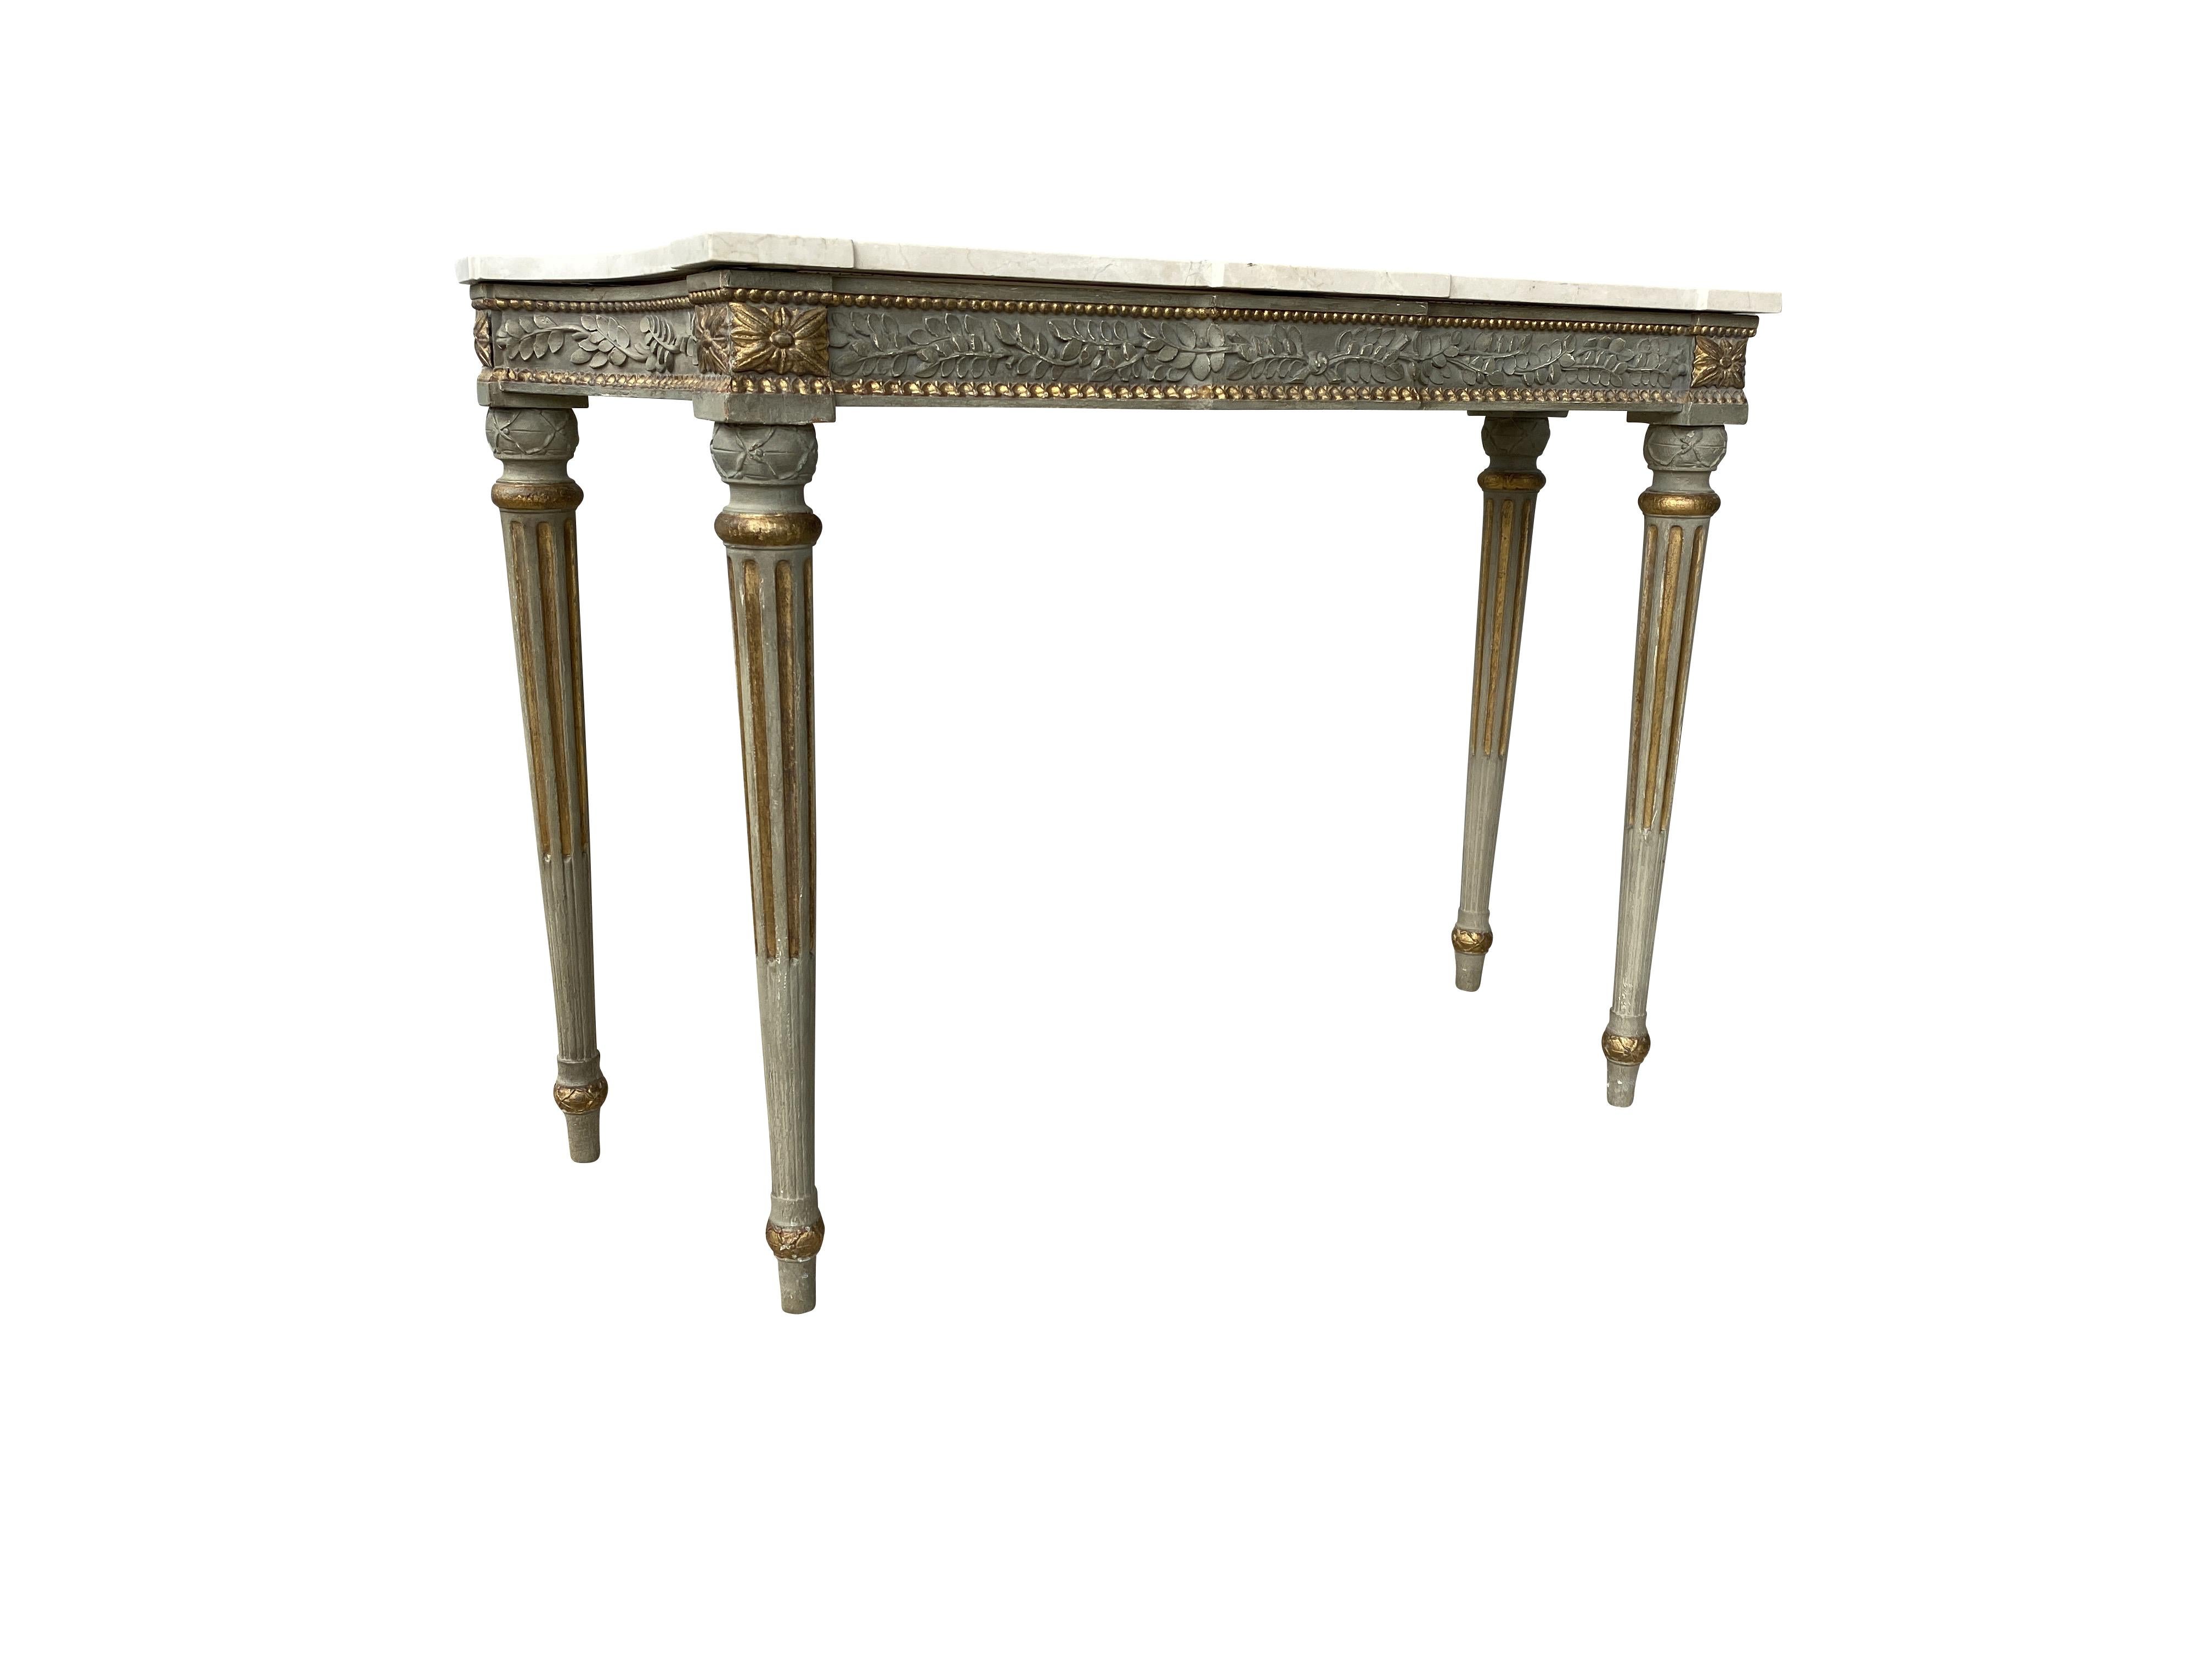 With rectangular marble top with curved ends over a conforming frieze carved with laurel leaves and beading, raised on circular tapered stop fluted legs. Provenance: Waldorf Towers New York. With label.